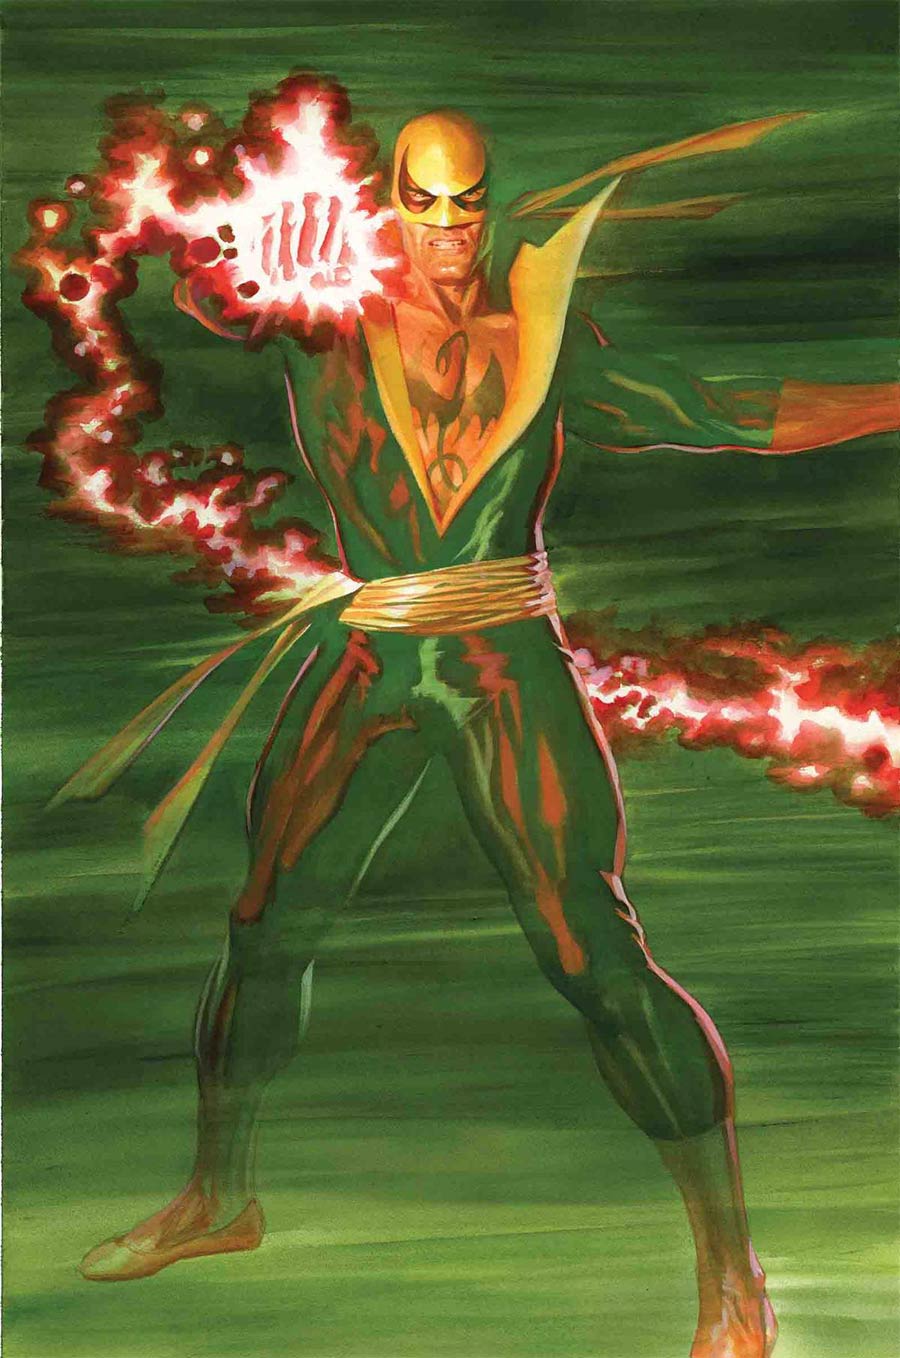 Iron Fist Vol 5 #1 By Alex Ross Poster